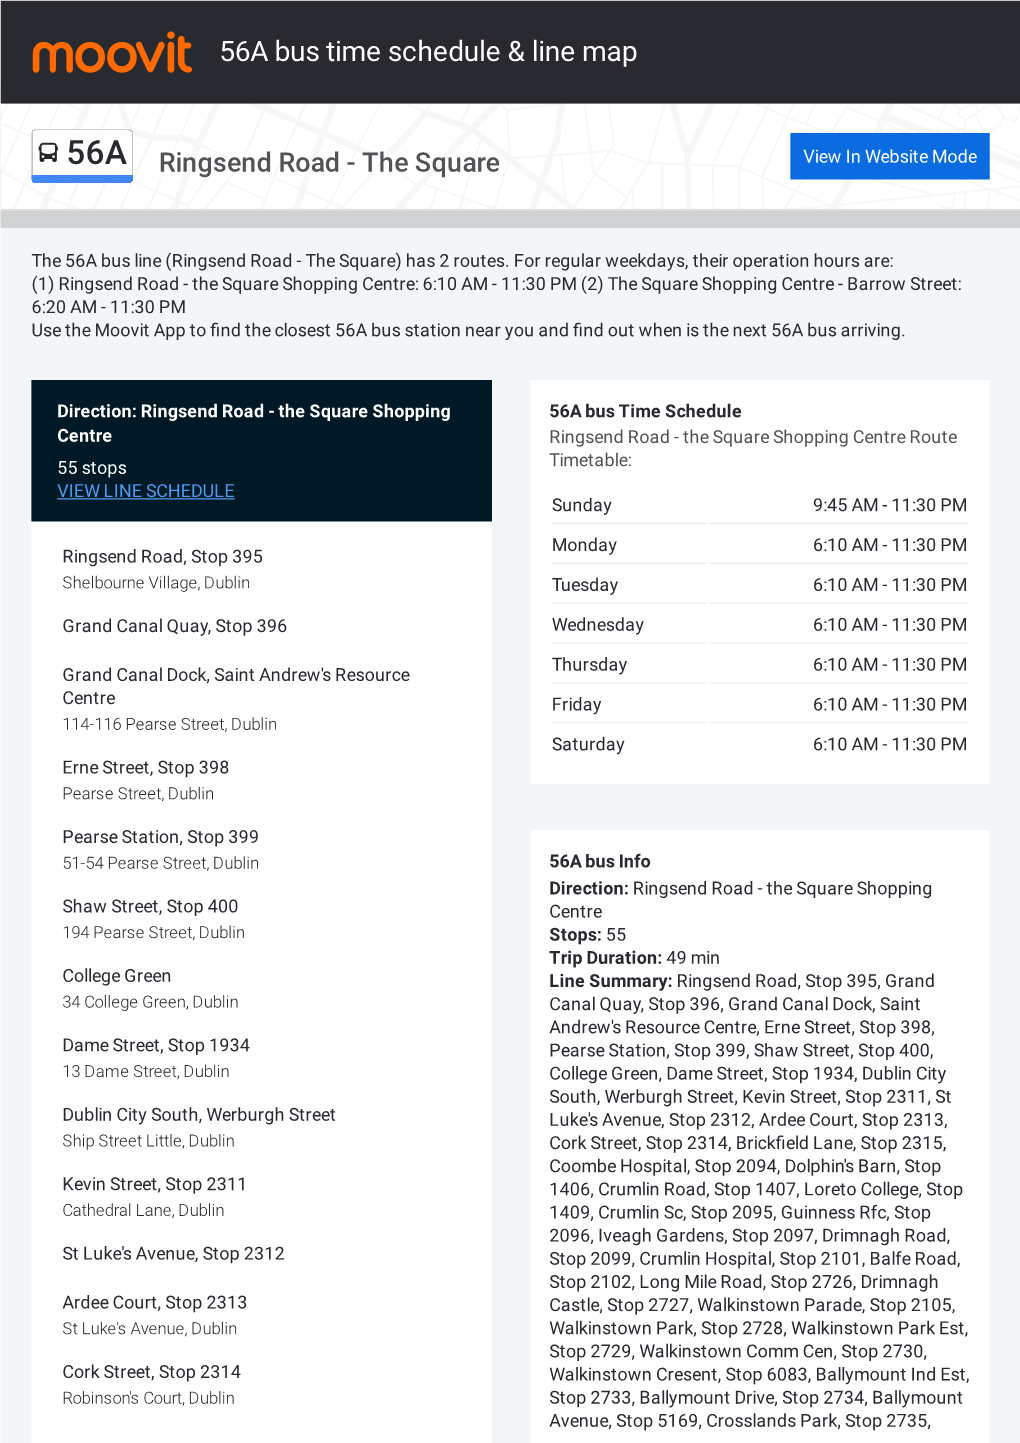 56A Bus Time Schedule & Line Route